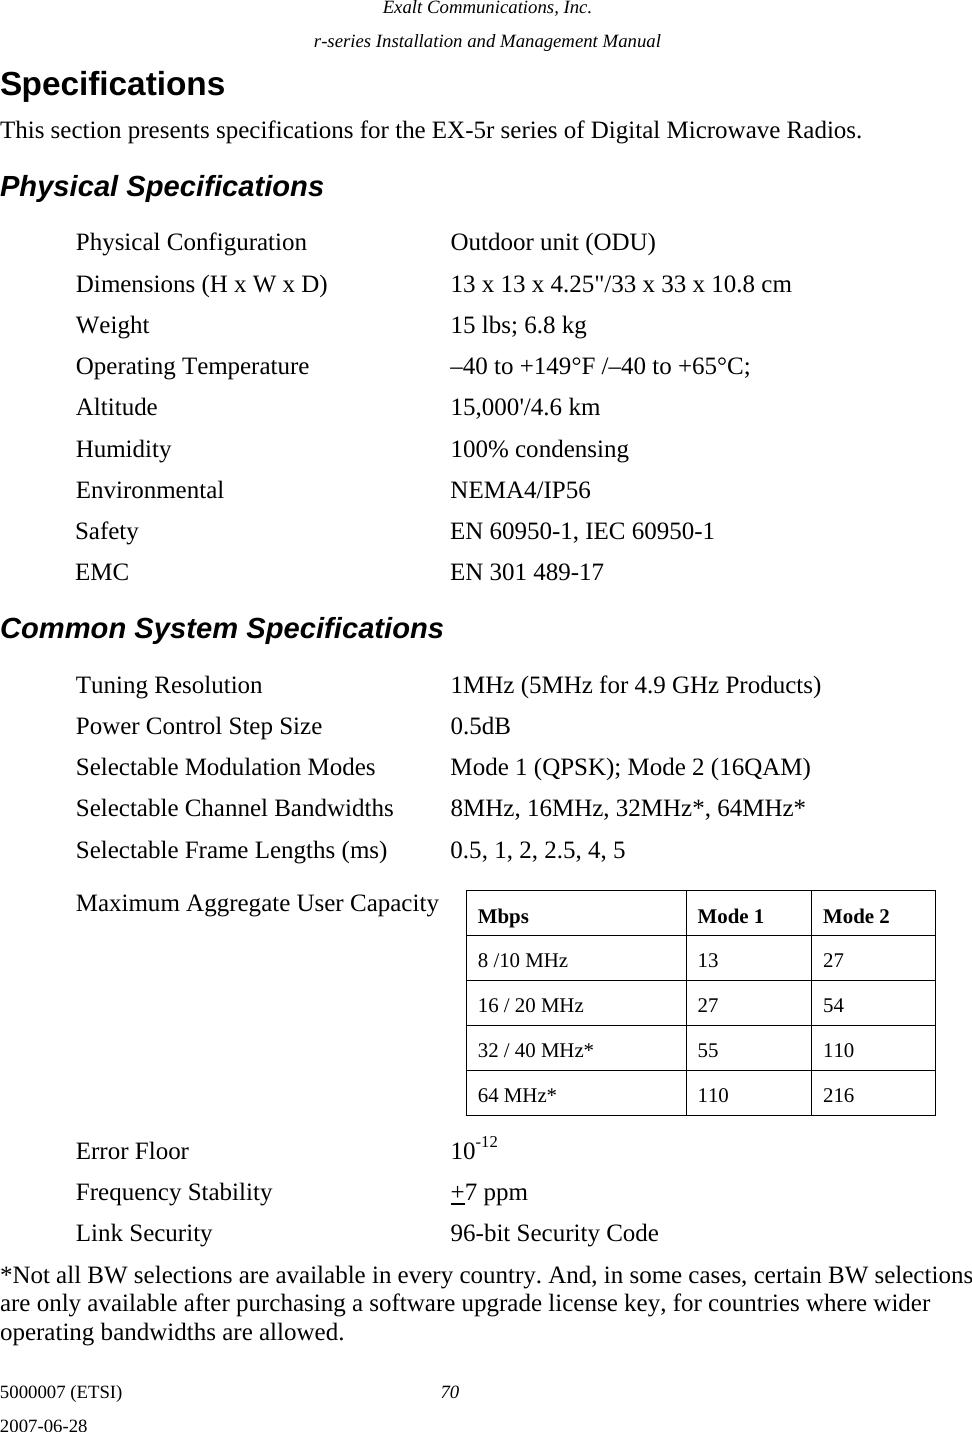 Exalt Communications, Inc. r-series Installation and Management Manual 5000007 (ETSI)  70 2007-06-28  Specifications This section presents specifications for the EX-5r series of Digital Microwave Radios. Physical Specifications   Physical Configuration  Outdoor unit (ODU)   Dimensions (H x W x D)  13 x 13 x 4.25&quot;/33 x 33 x 10.8 cm   Weight  15 lbs; 6.8 kg   Operating Temperature  –40 to +149°F /–40 to +65°C;   Altitude  15,000&apos;/4.6 km   Humidity  100% condensing  Environmental  NEMA4/IP56 Safety    EN 60950-1, IEC 60950-1 EMC     EN 301 489-17 Common System Specifications   Tuning Resolution  1MHz (5MHz for 4.9 GHz Products)   Power Control Step Size  0.5dB   Selectable Modulation Modes  Mode 1 (QPSK); Mode 2 (16QAM)   Selectable Channel Bandwidths  8MHz, 16MHz, 32MHz*, 64MHz*   Selectable Frame Lengths (ms)  0.5, 1, 2, 2.5, 4, 5  Maximum Aggregate User Capacity       Error Floor  10-12  Frequency Stability  +7 ppm   Link Security  96-bit Security Code *Not all BW selections are available in every country. And, in some cases, certain BW selections are only available after purchasing a software upgrade license key, for countries where wider operating bandwidths are allowed. Mbps  Mode 1  Mode 2 8 /10 MHz  13  27 16 / 20 MHz  27  54 32 / 40 MHz*  55  110 64 MHz*  110  216 